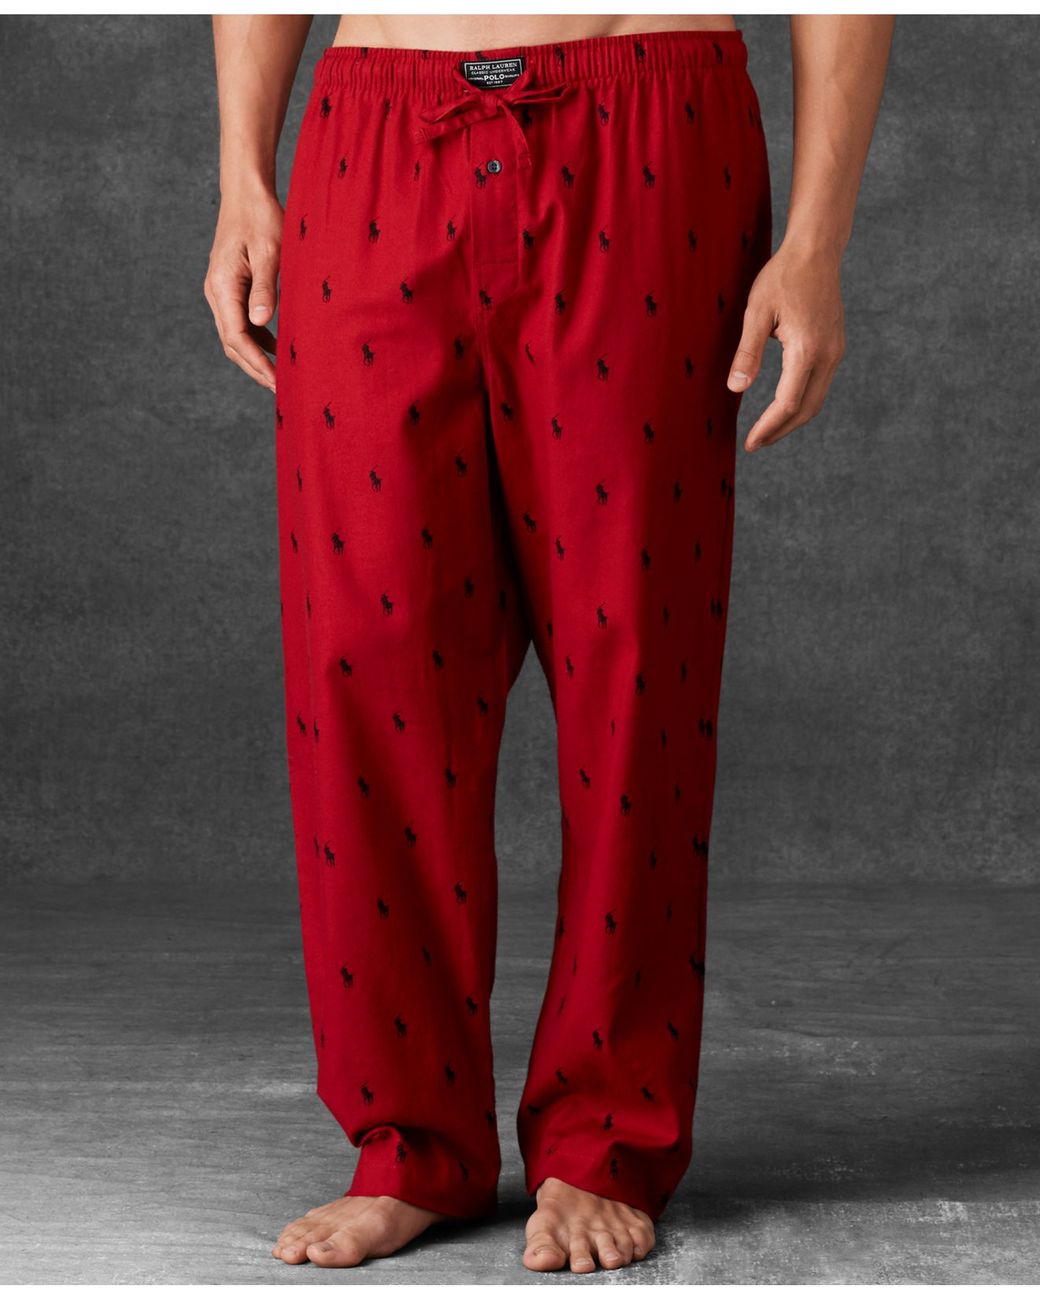 https://cdna.lystit.com/1040/1300/n/photos/1e9f-2014/12/02/polo-ralph-lauren-red-mens-allover-polo-player-woven-pajama-pants-product-1-22848363-0-299929246-normal.jpeg